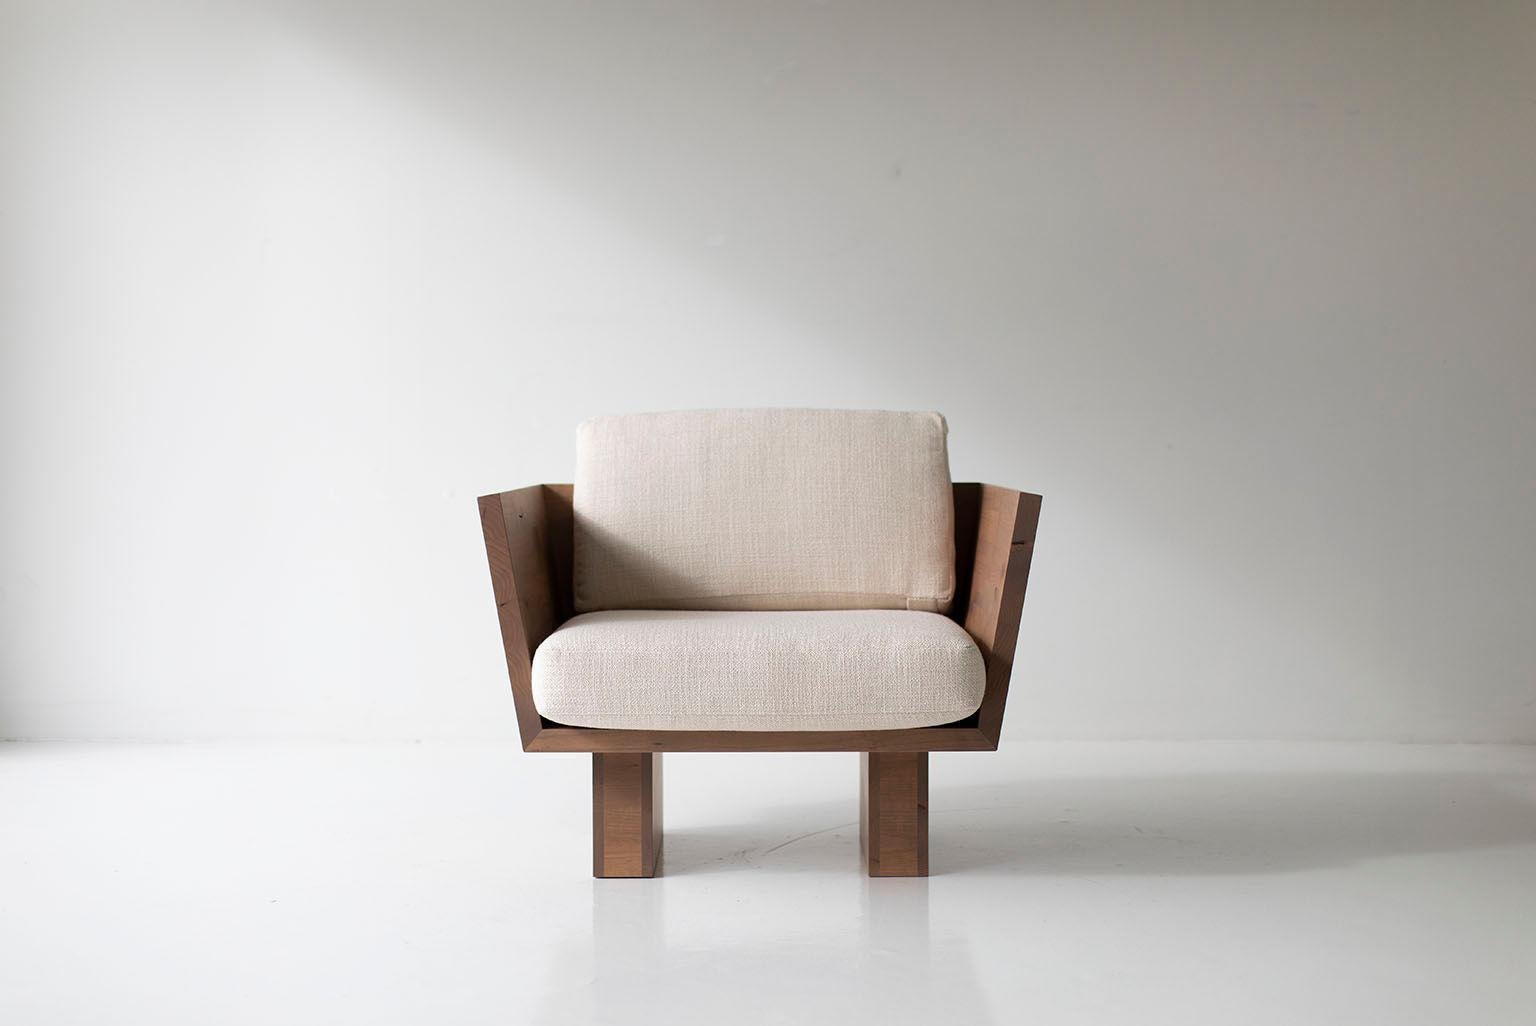 This Suelo Modern lounge chair is beautifully constructed from solid wood in Ohio, USA. This silhouette is simple, modern, and sleek with comfortable back and seat cushions. This is the perfect chair for any space, indoor or outdoor. The Suelo